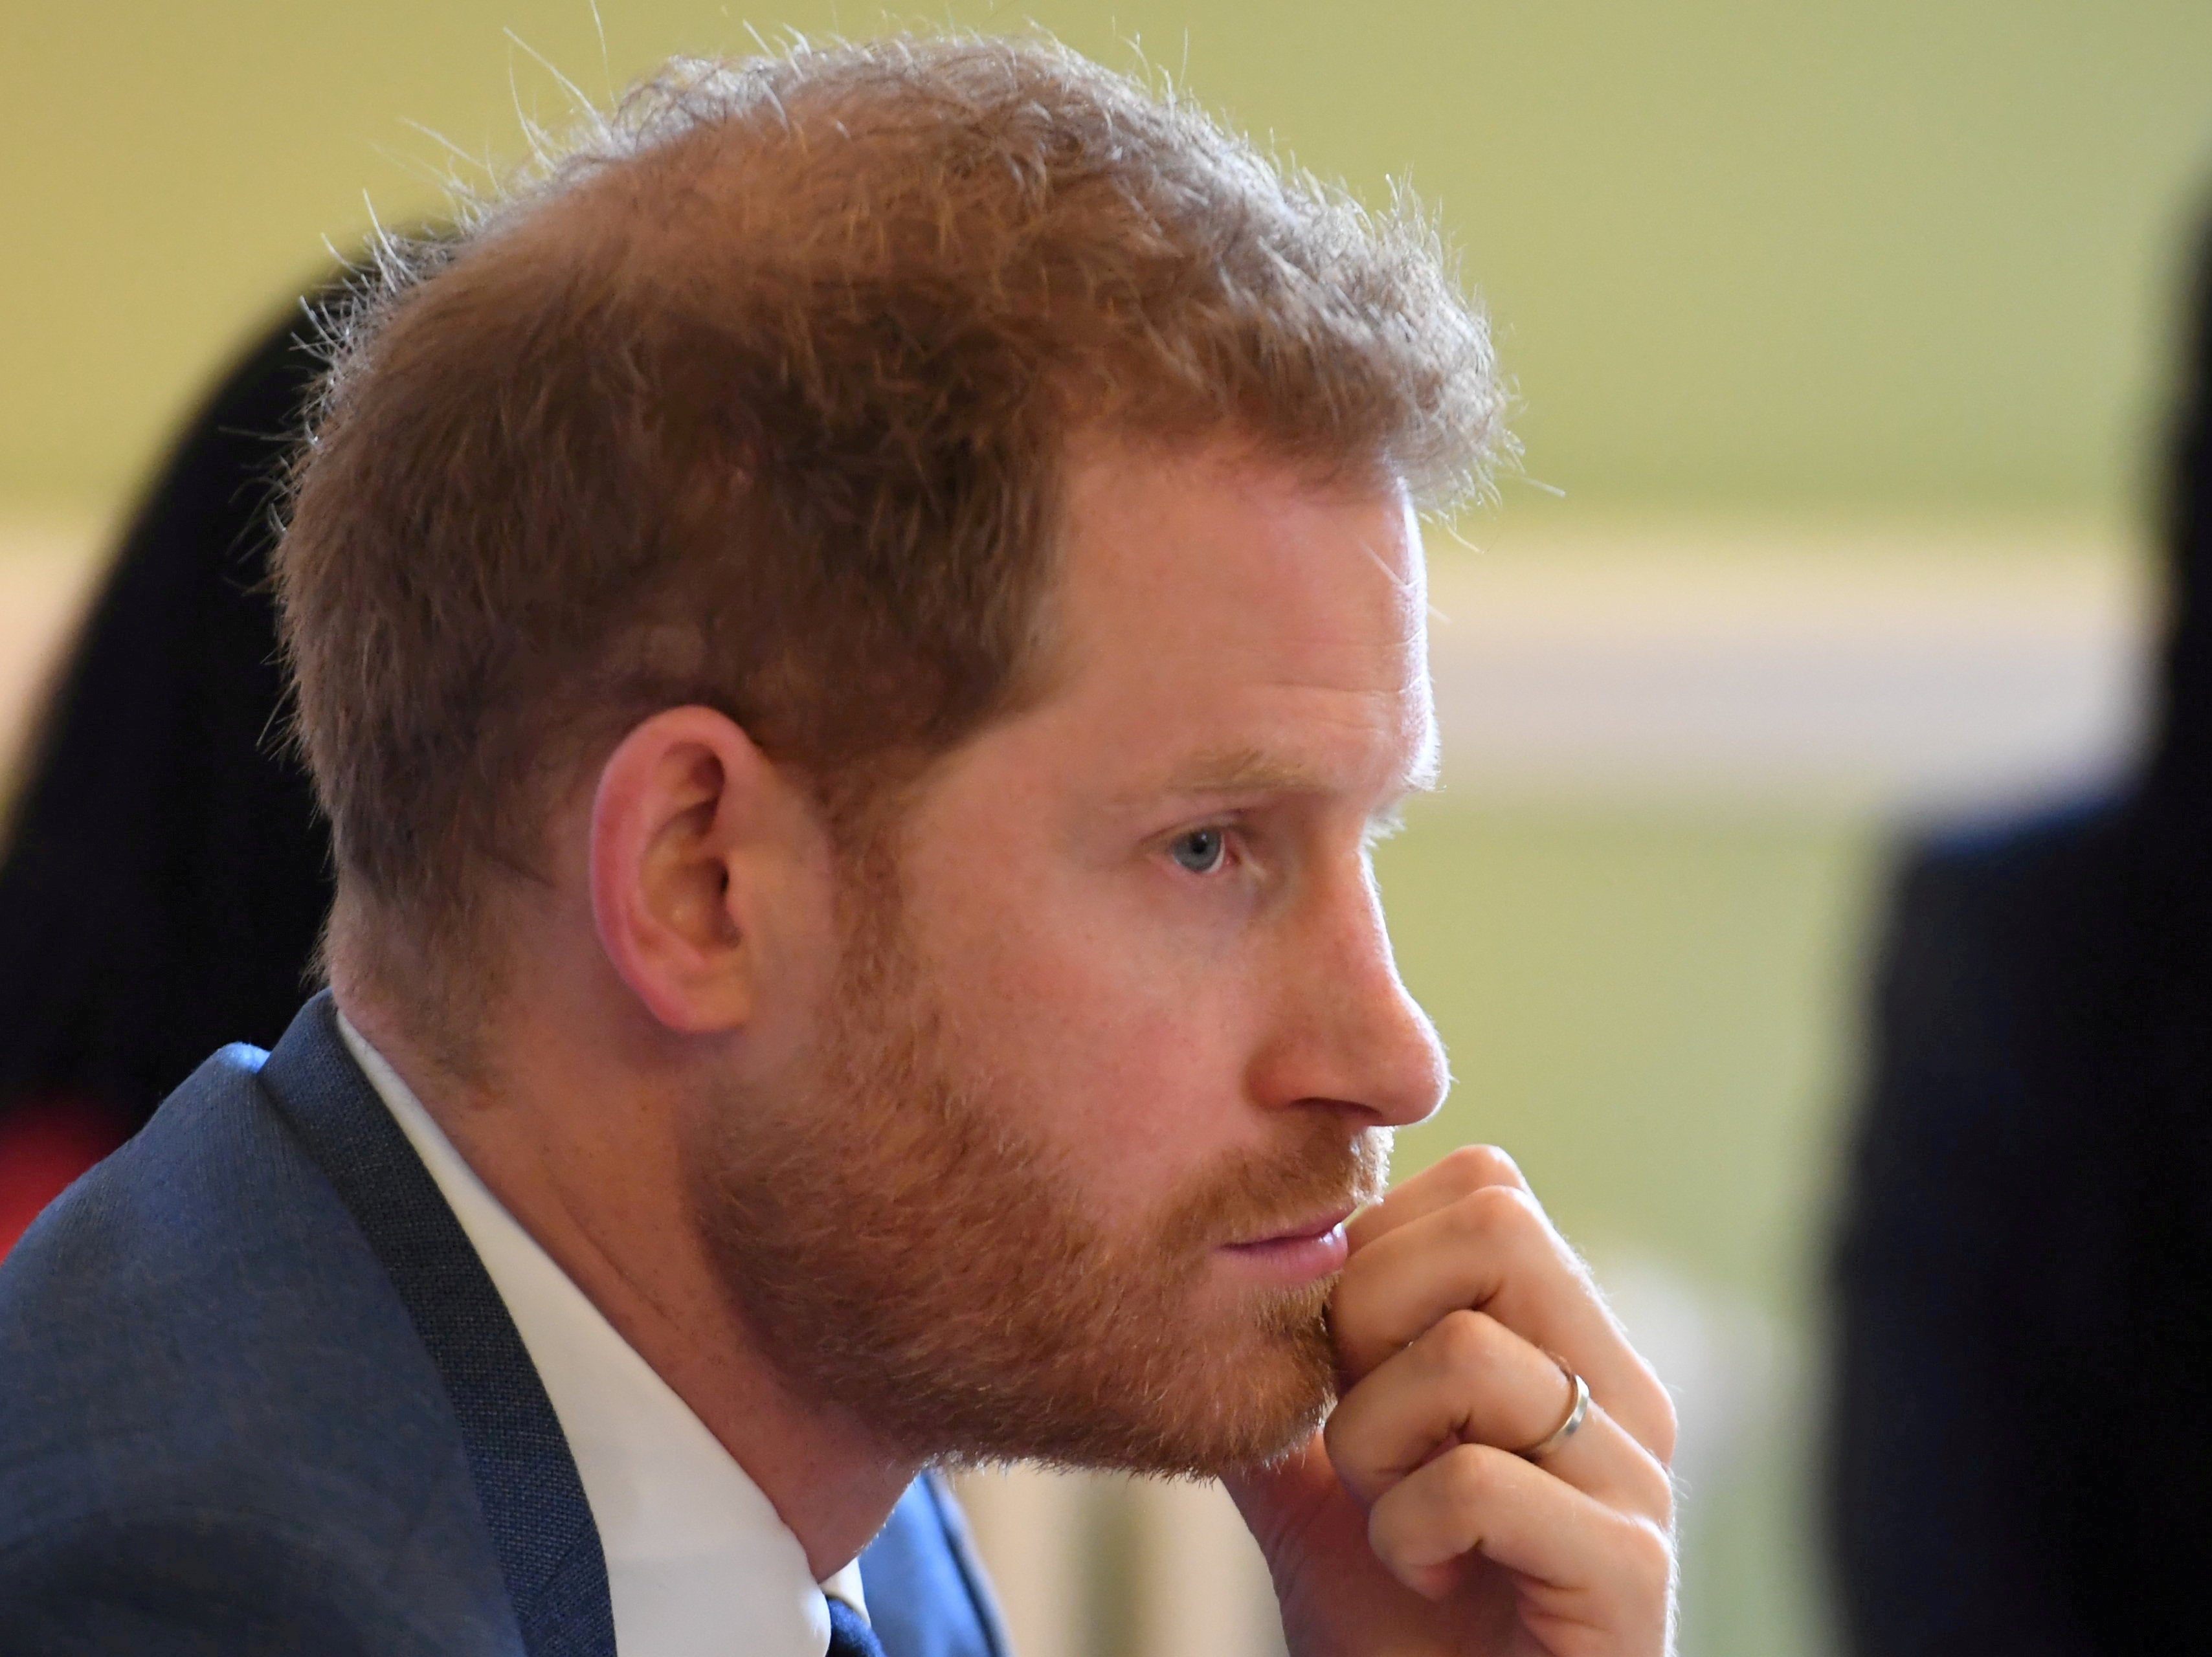 Prince Harry told Oprah that heavy drinking masked the pain of his mother Diana's death